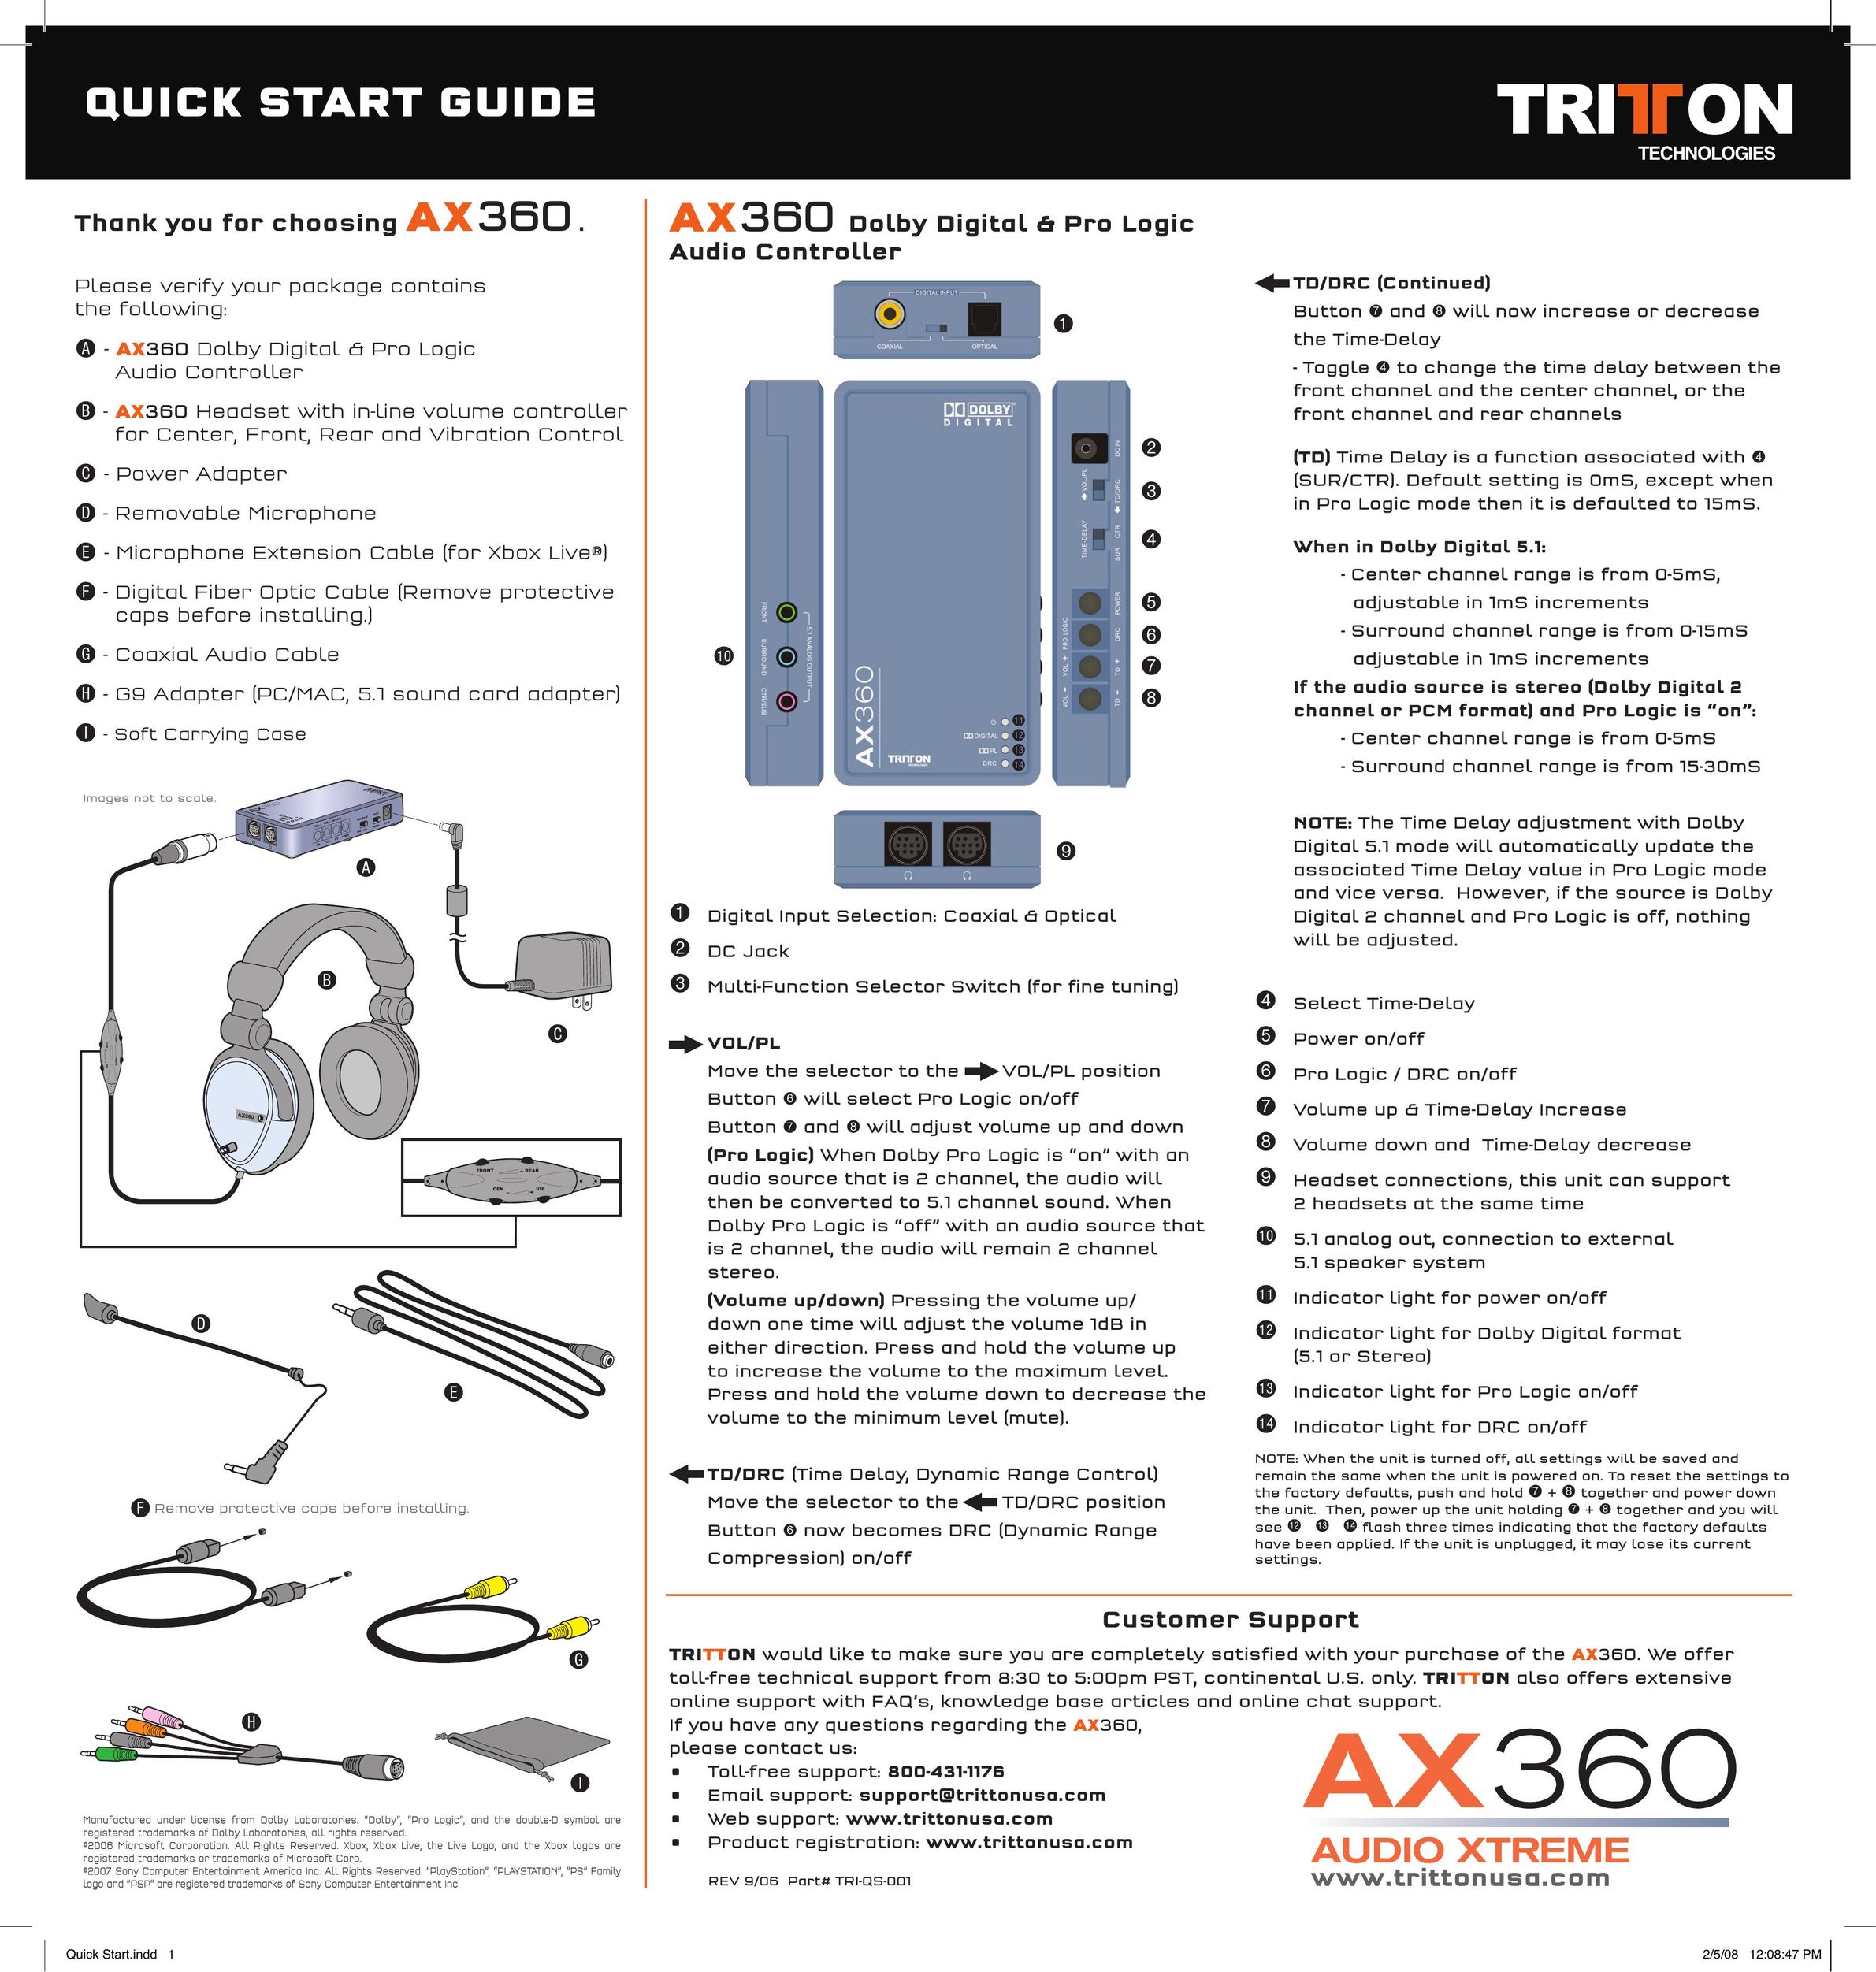 Tritton Technologies AX360 AUDIO EXTREME Video Game Controller User Manual